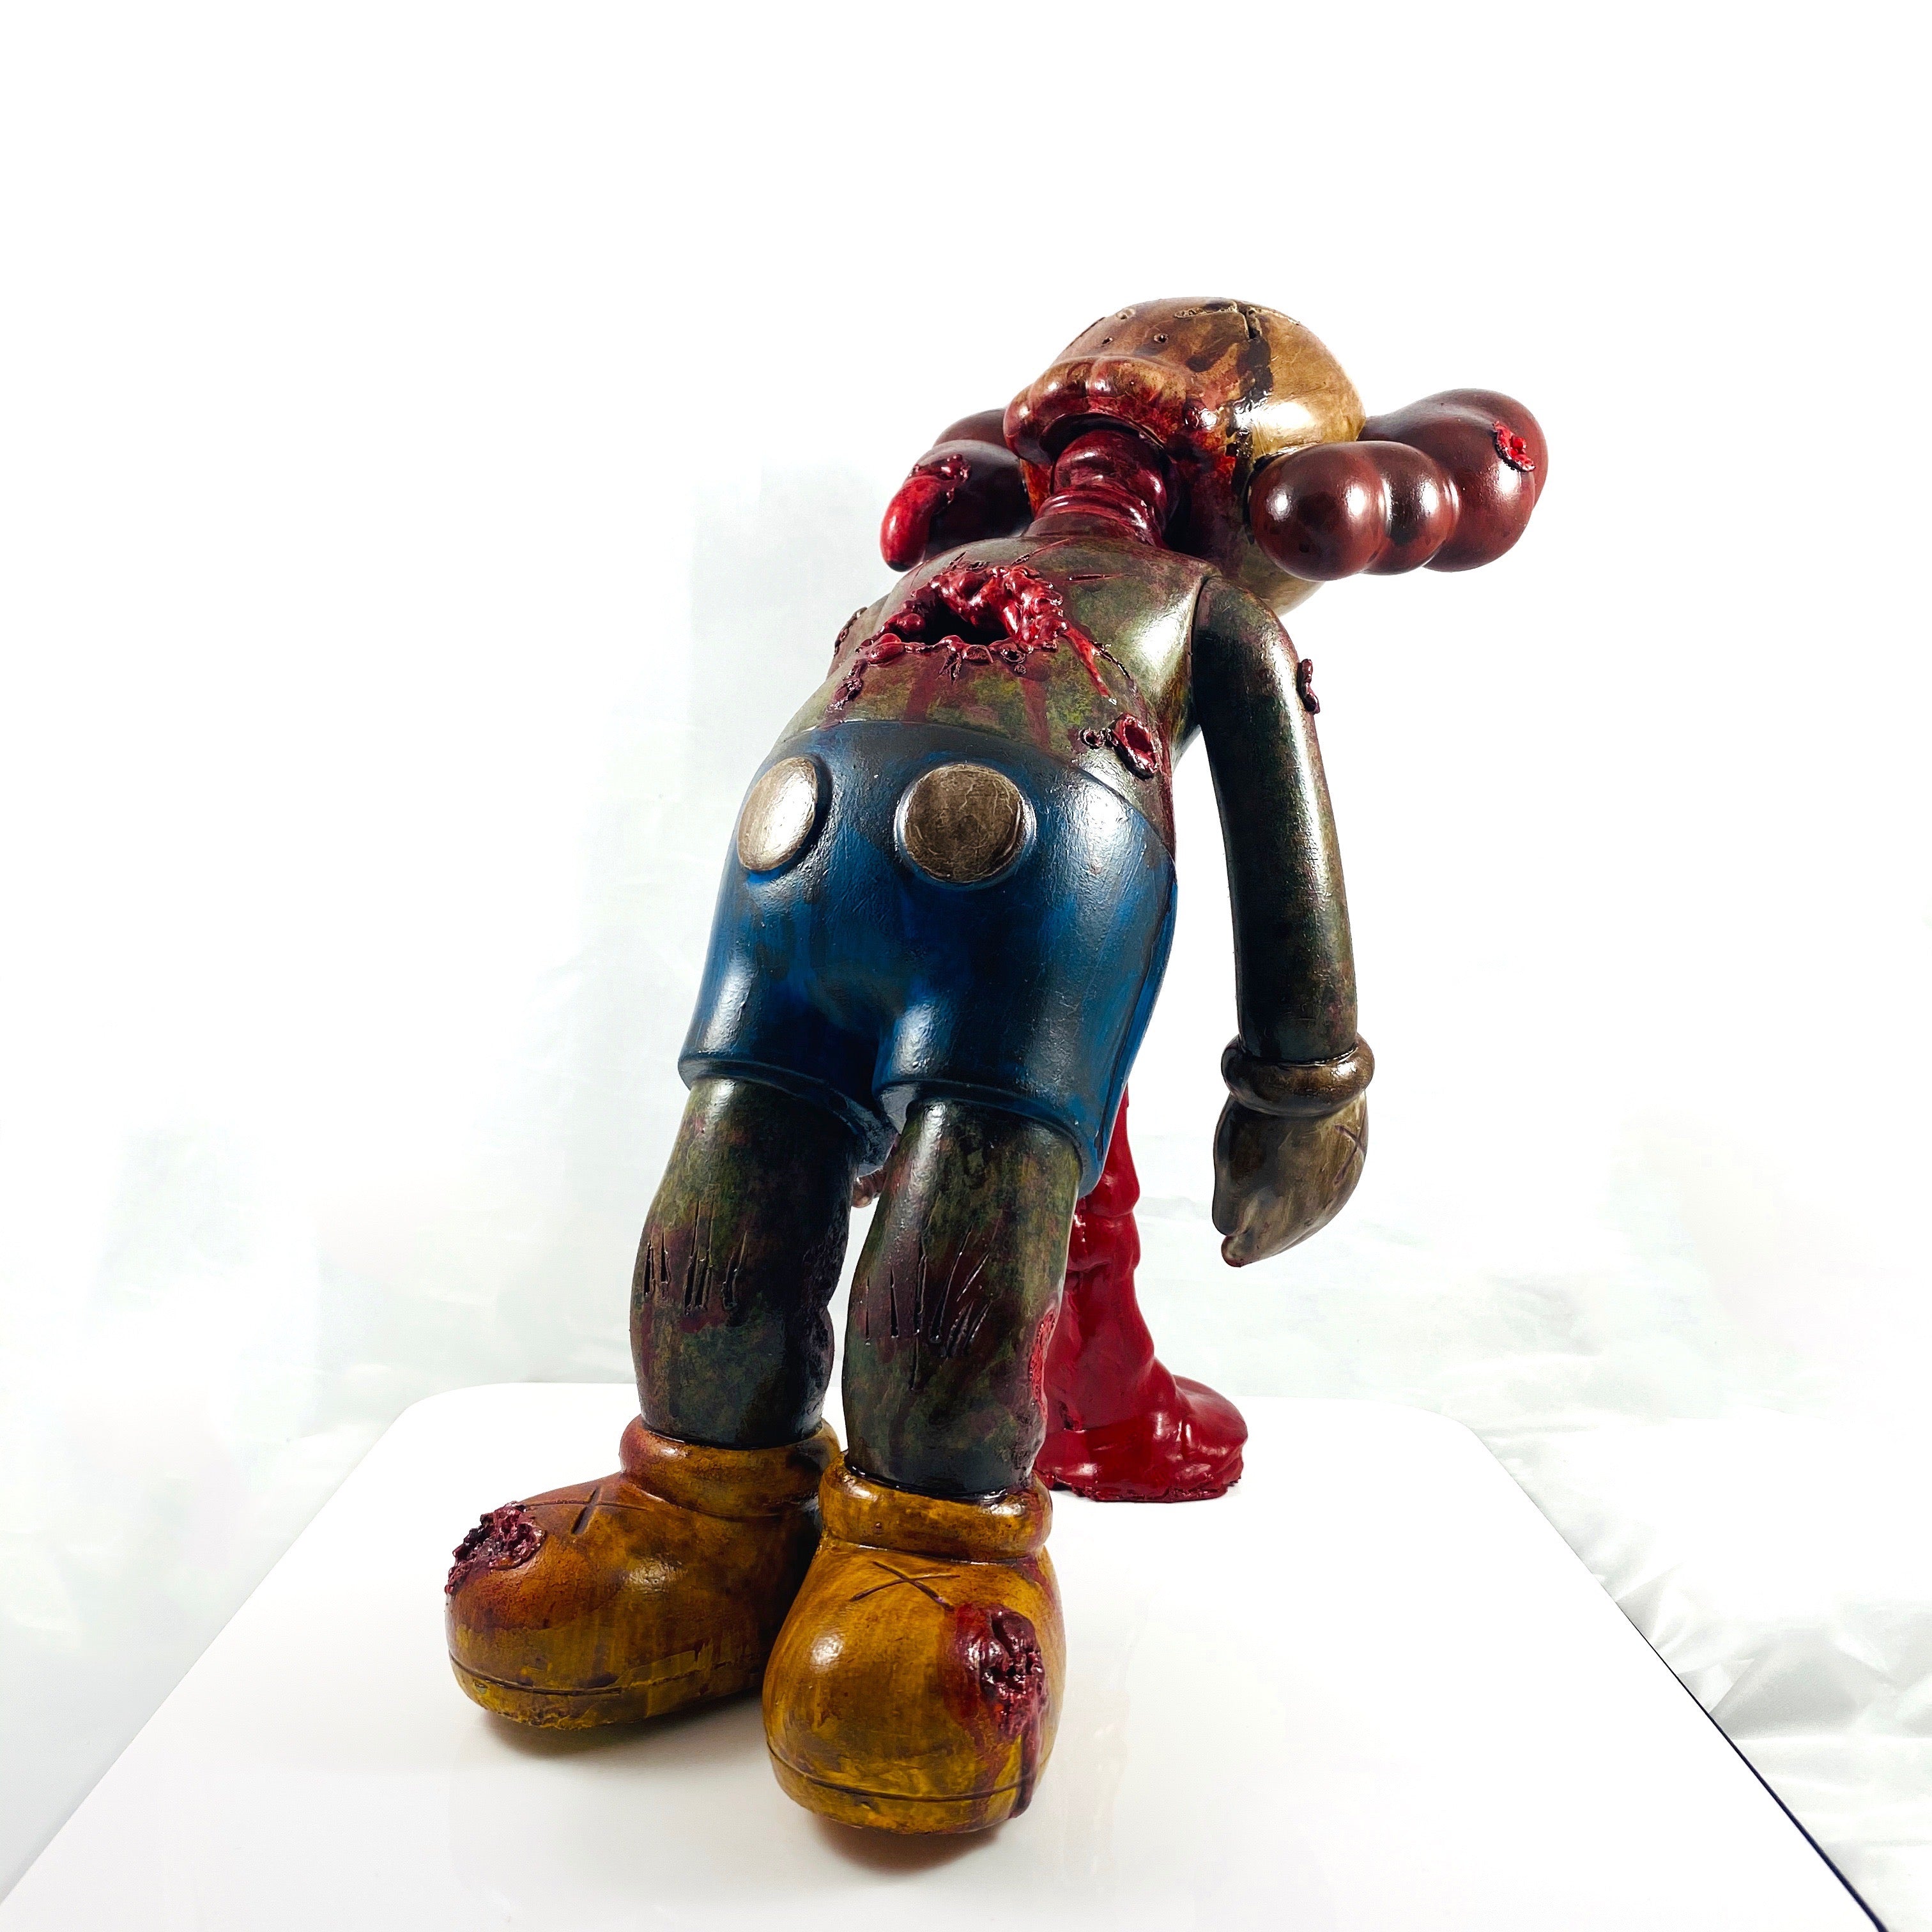 Custom 16 Kaws Companion figurine, Misappropriated Icon 3 - Cause I'm Dead By Red Guardian, featuring a statue of a man with blood on his body.